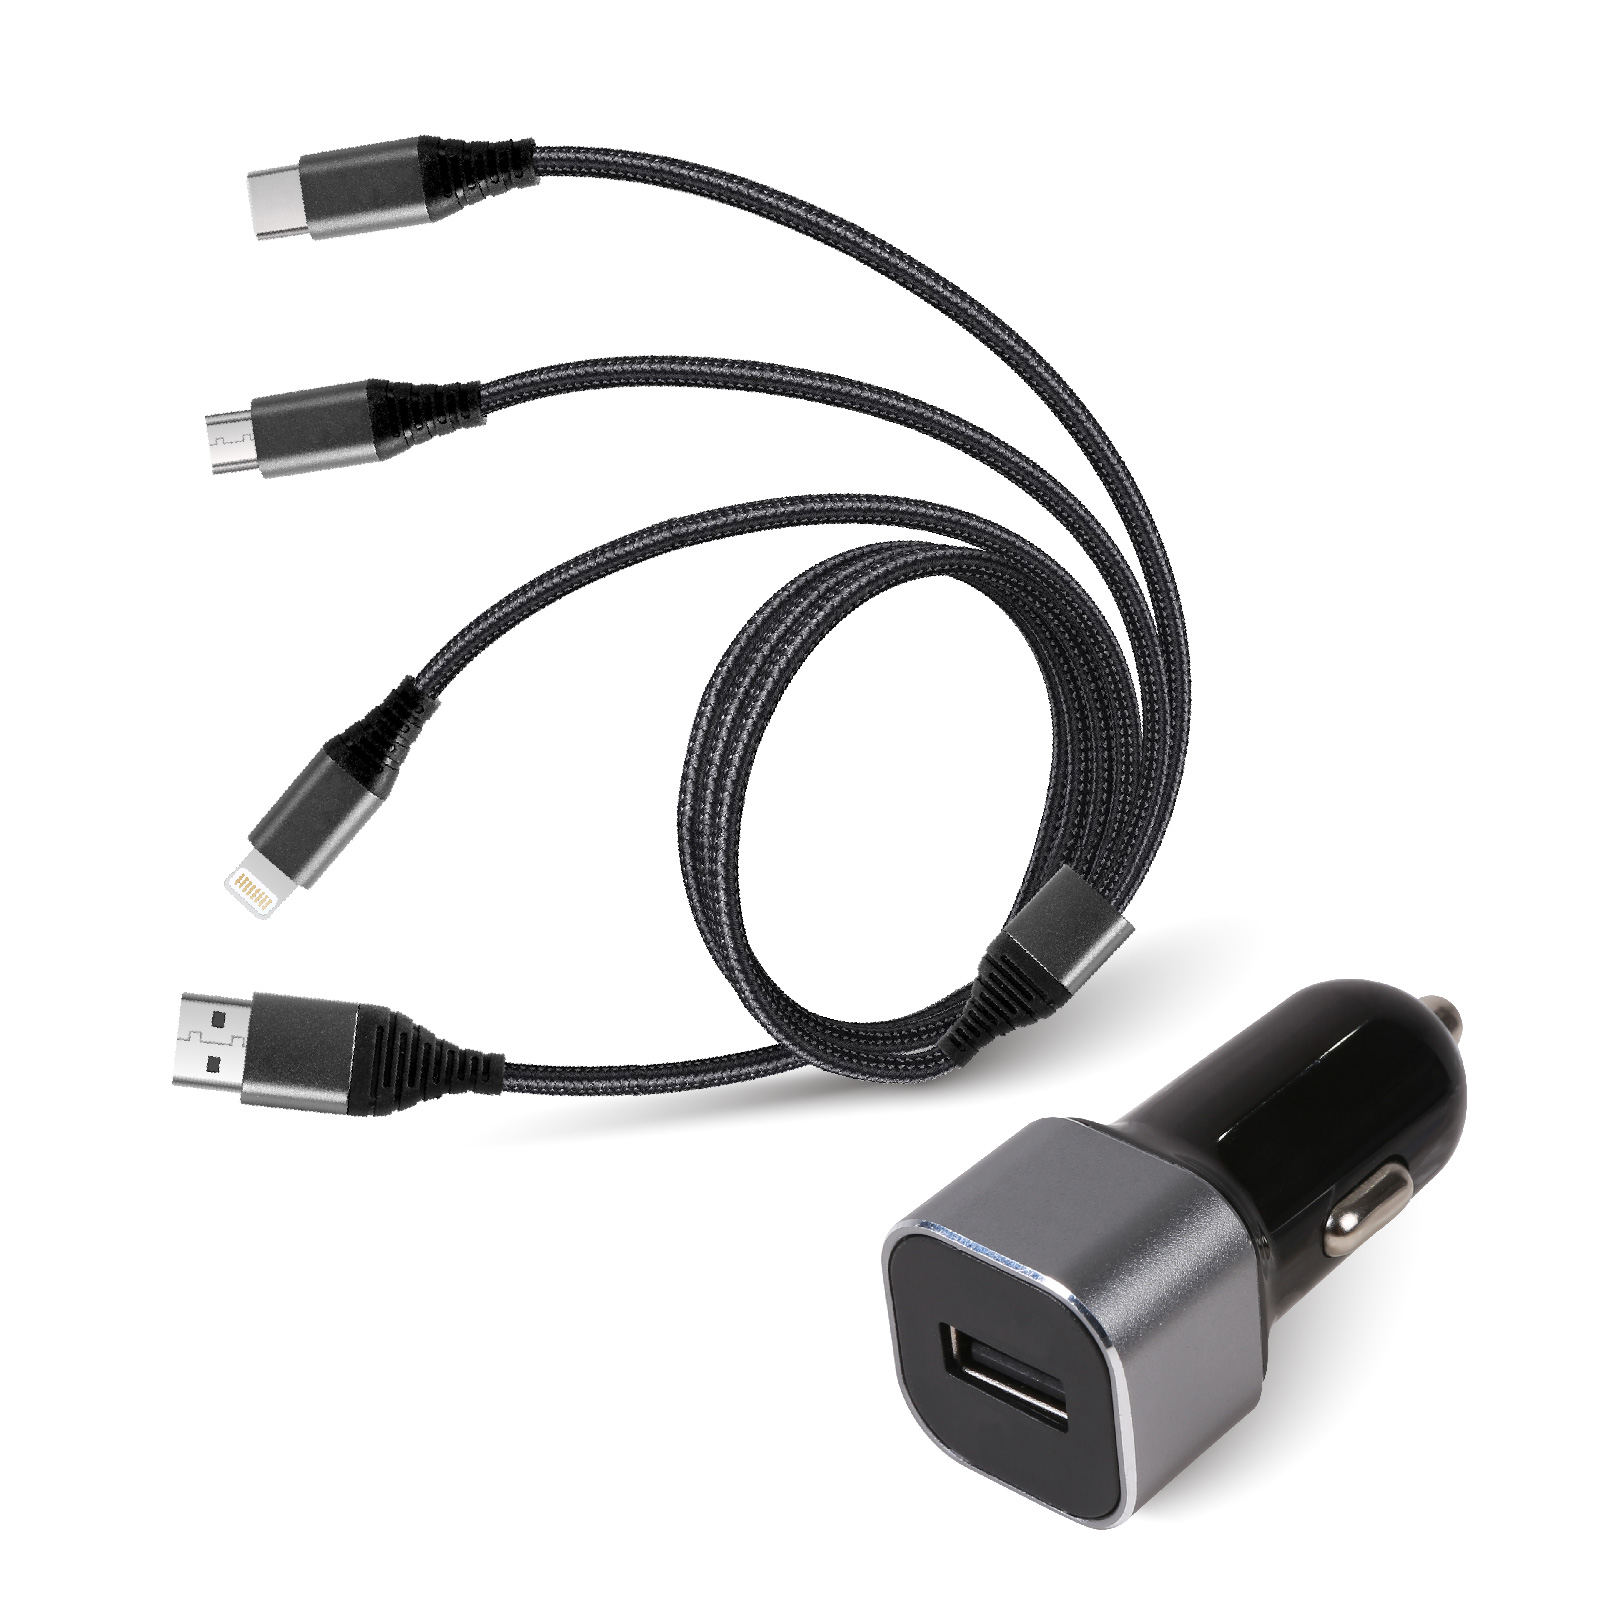 3 In 1 Cable & Car Charger Combo